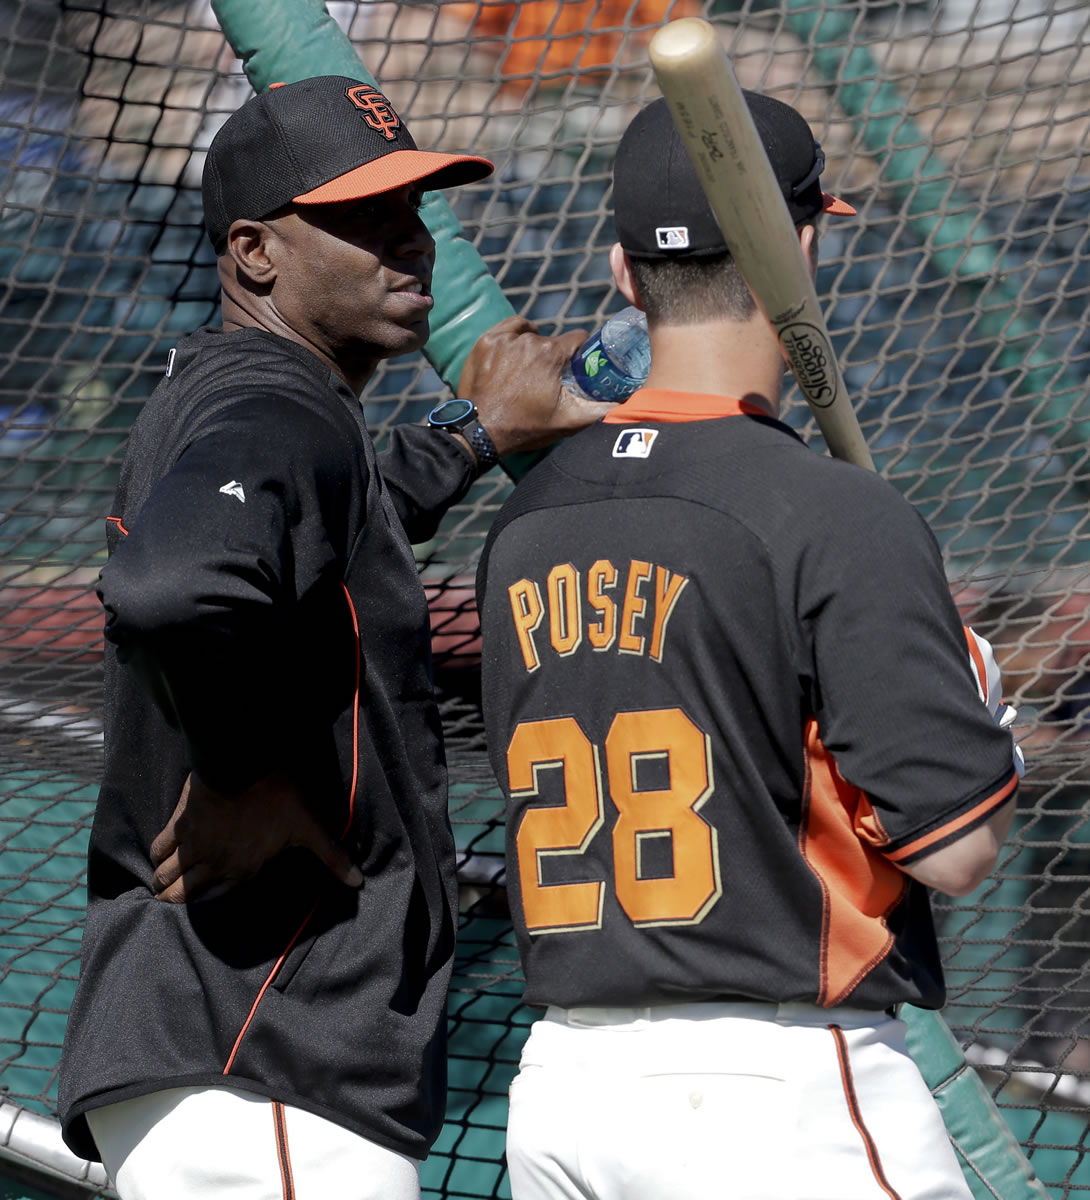 San Francisco Giants former player Barry Bonds, left, chats with catcher Buster Posey during batting practice.